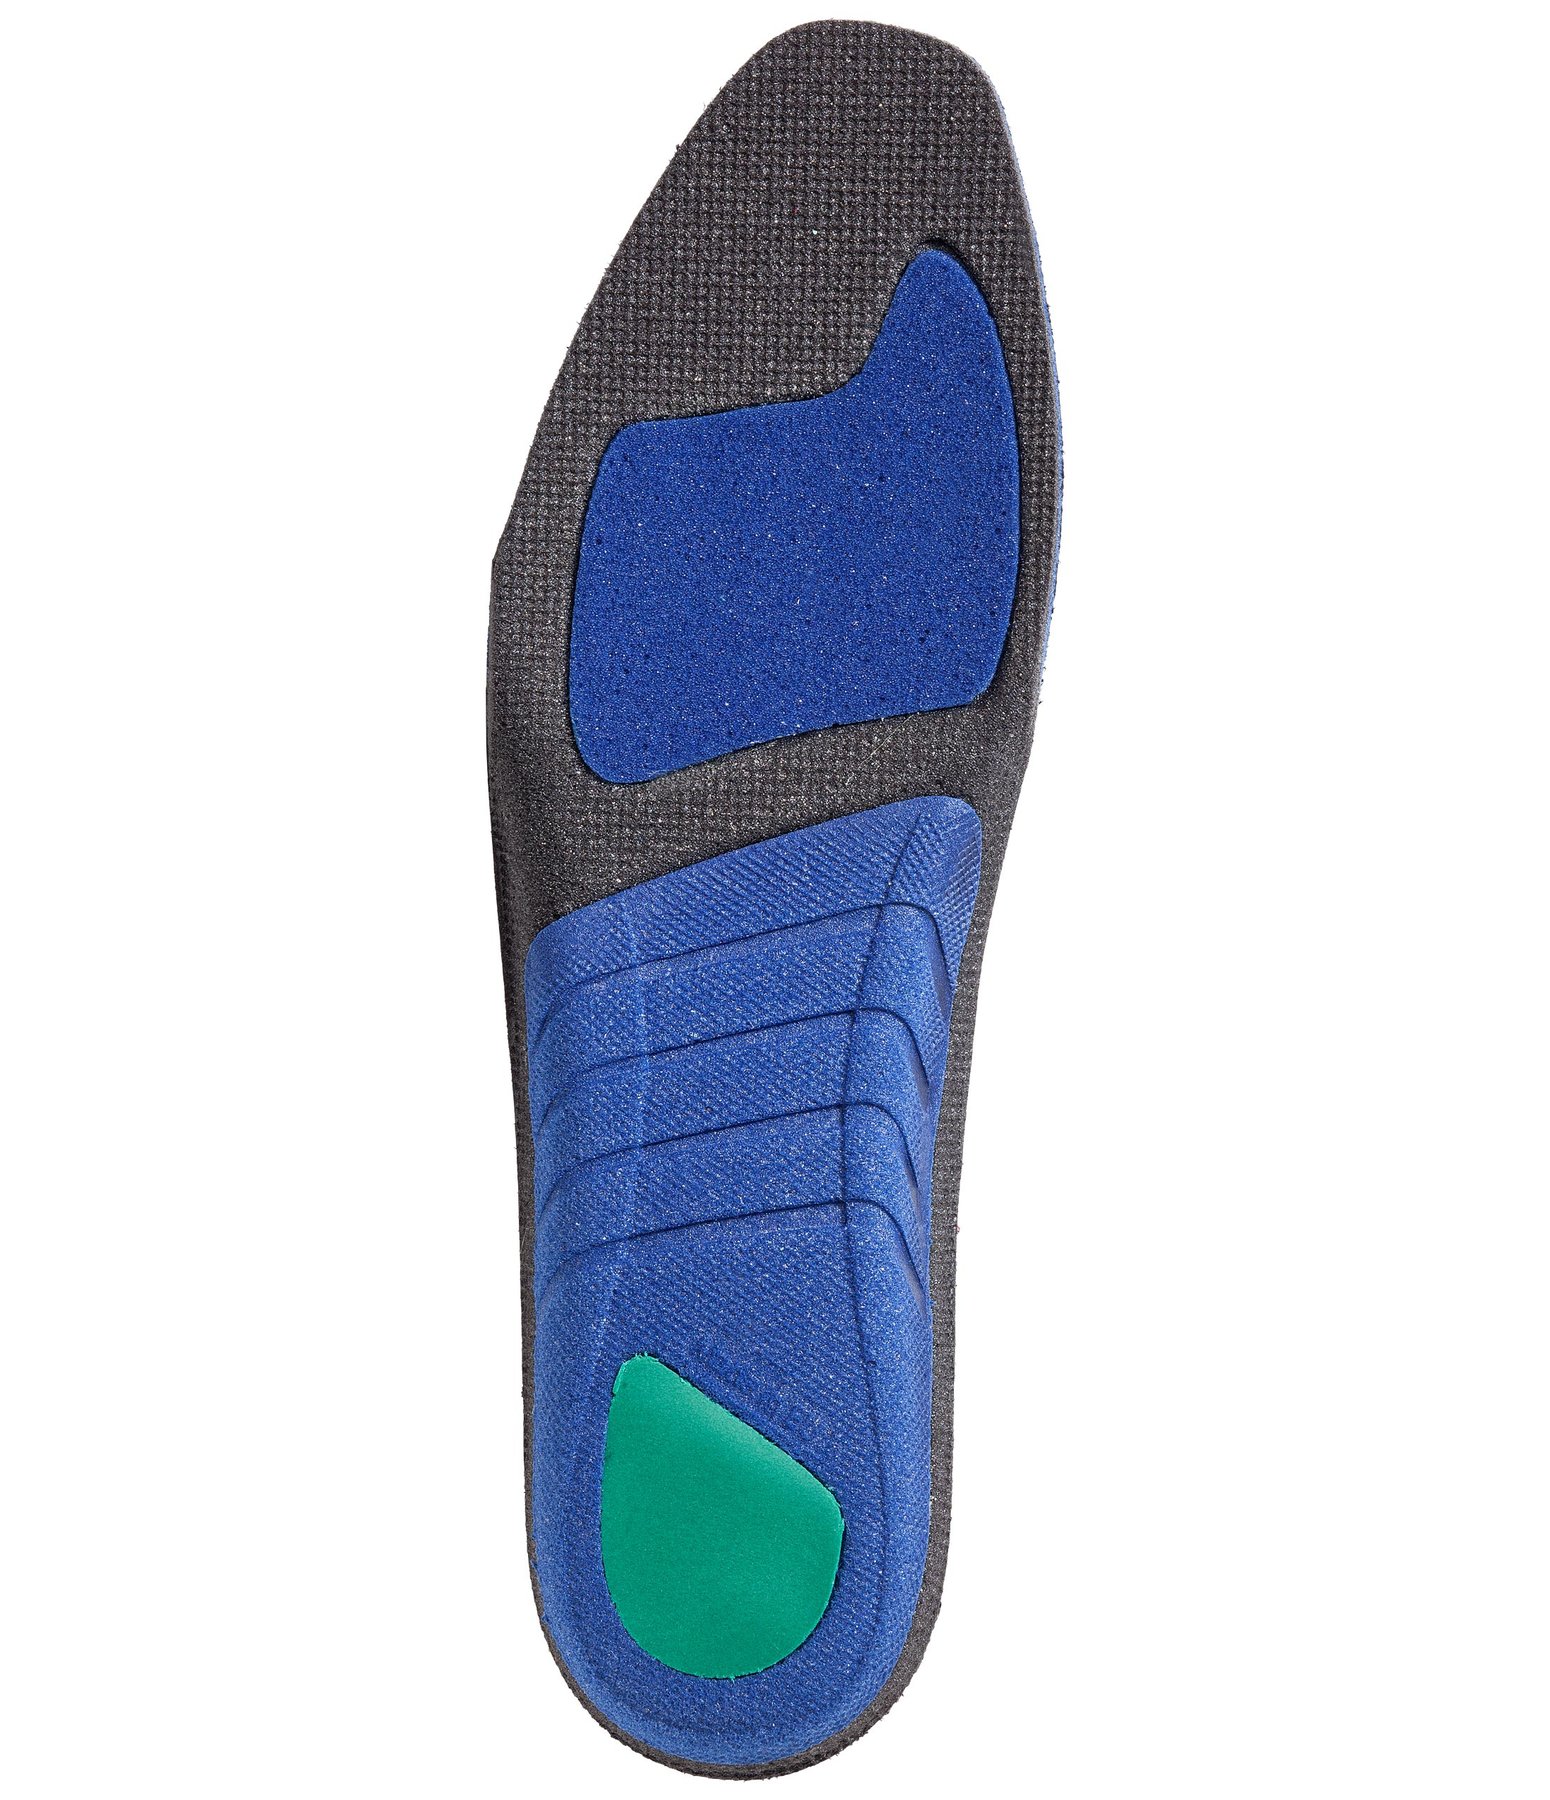 Einlegesohle Comfort Footbed Technology